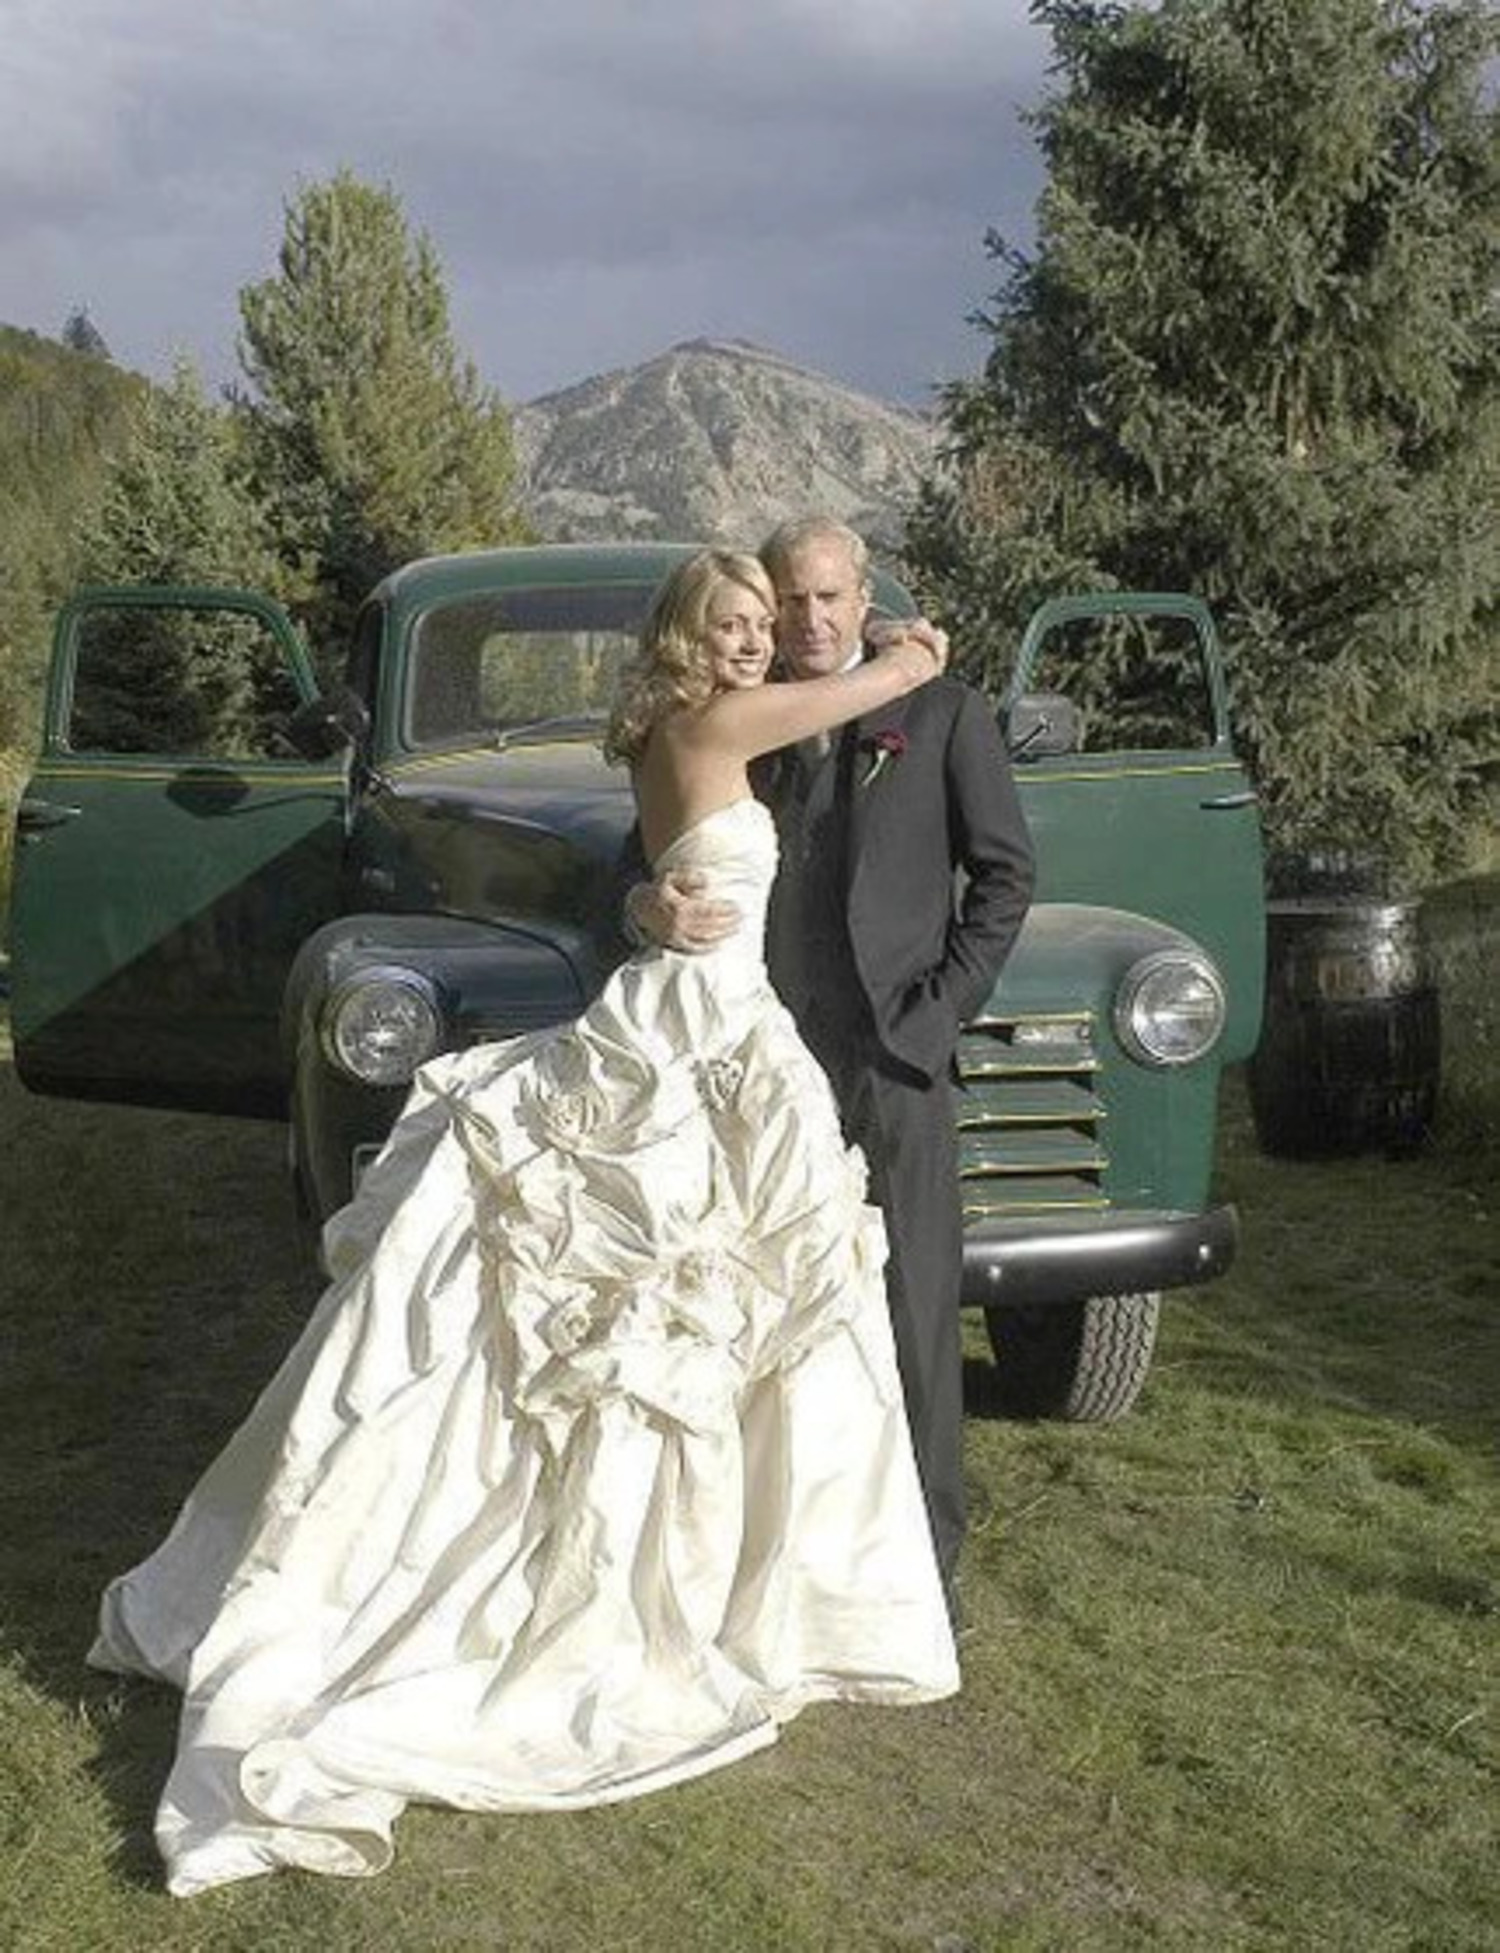 Christine Baumgartner in a ruffled white wedding dress and Kevin Costner in a black three-piece suit with a green vintage car and a mountain as their background on their wedding